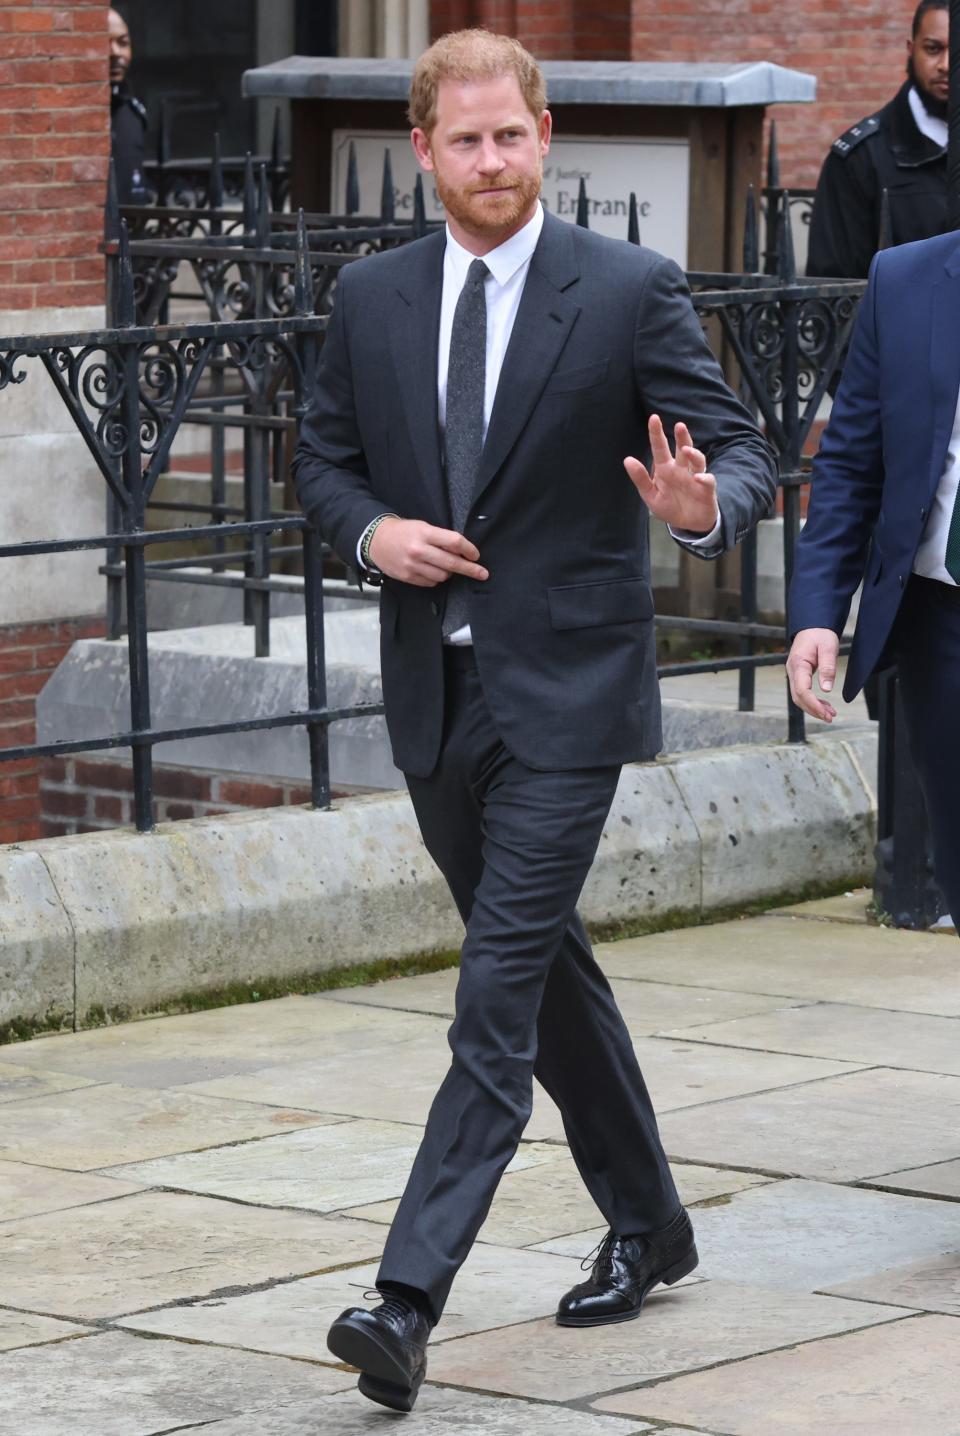 Prince Harry is shown leaving the Royal Courts of Justice in London in March. He is among a variety of claimants in lawsuits against the British press over a phone hacking scandal from years ago.